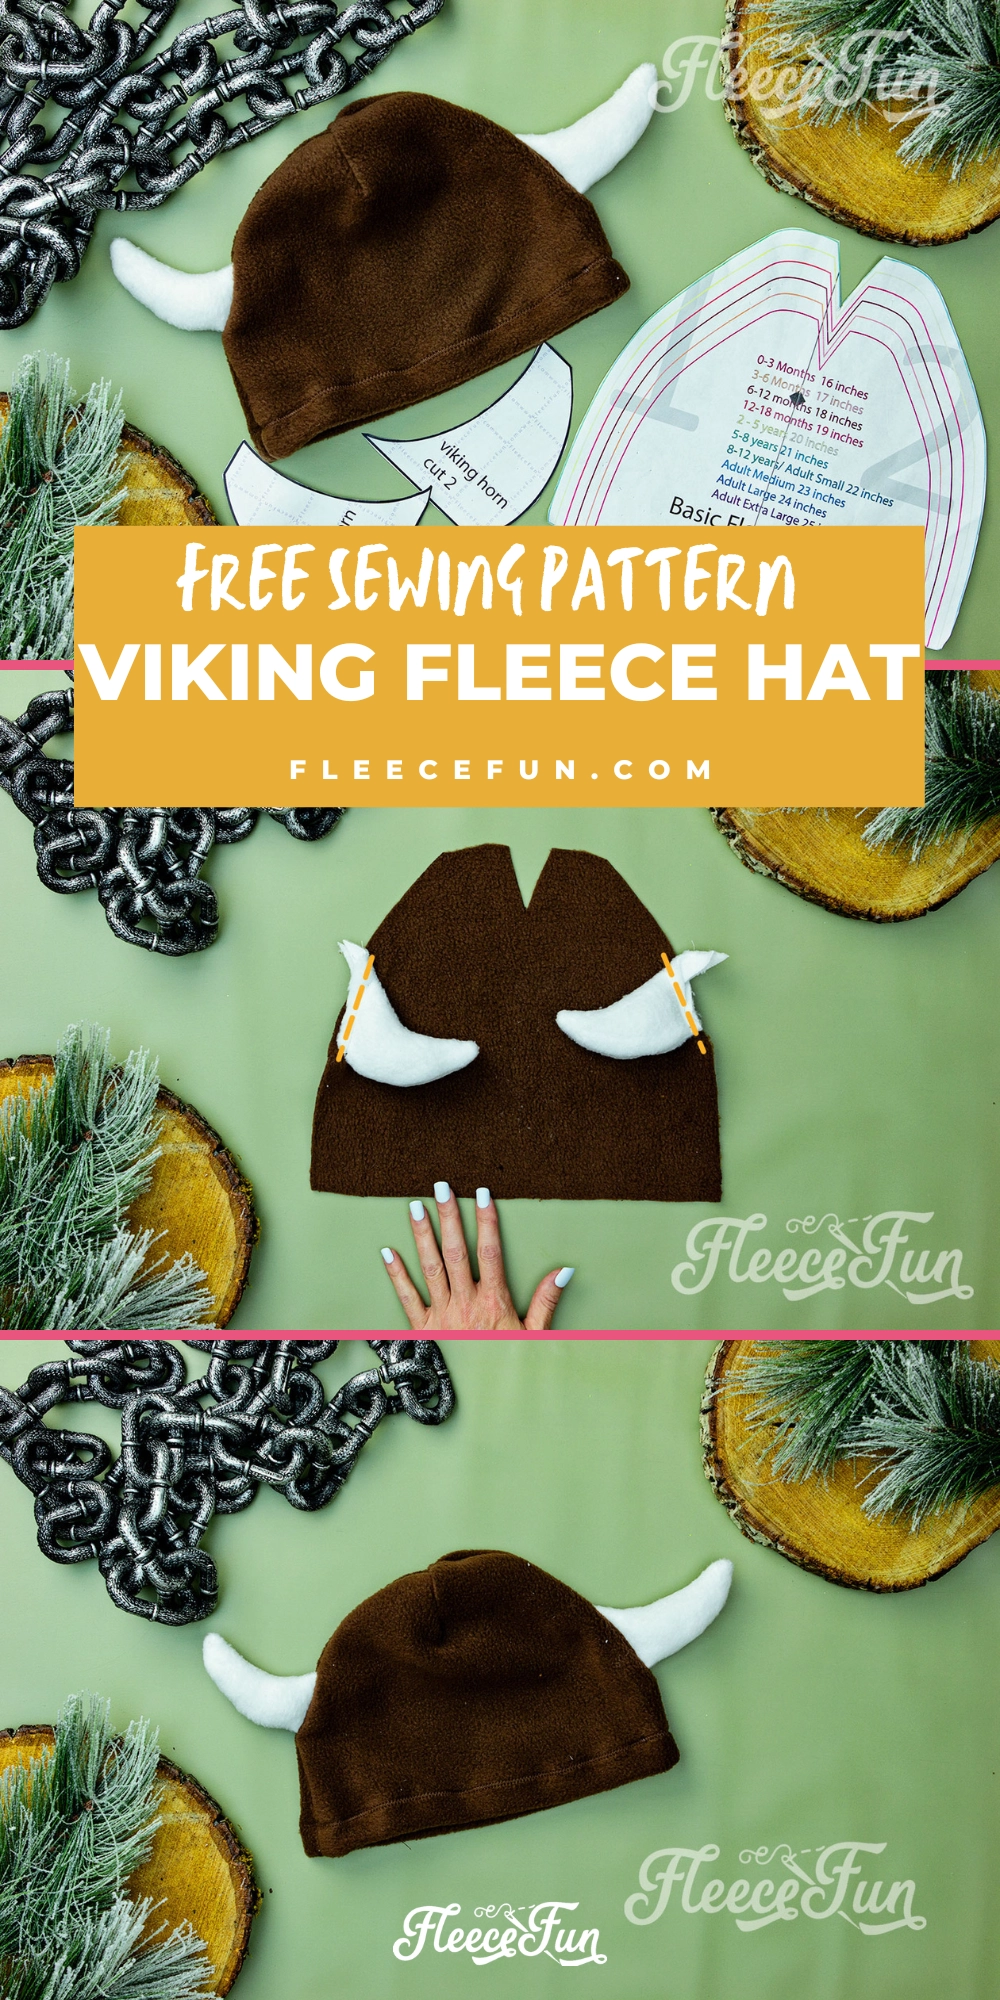 I love this fleece hat with horns. Such an easy sewing DIY. Great idea for a fun hat for kids to wear. Love that there is a video tutorial too! Good sewing project. Perfect for my little Viking.